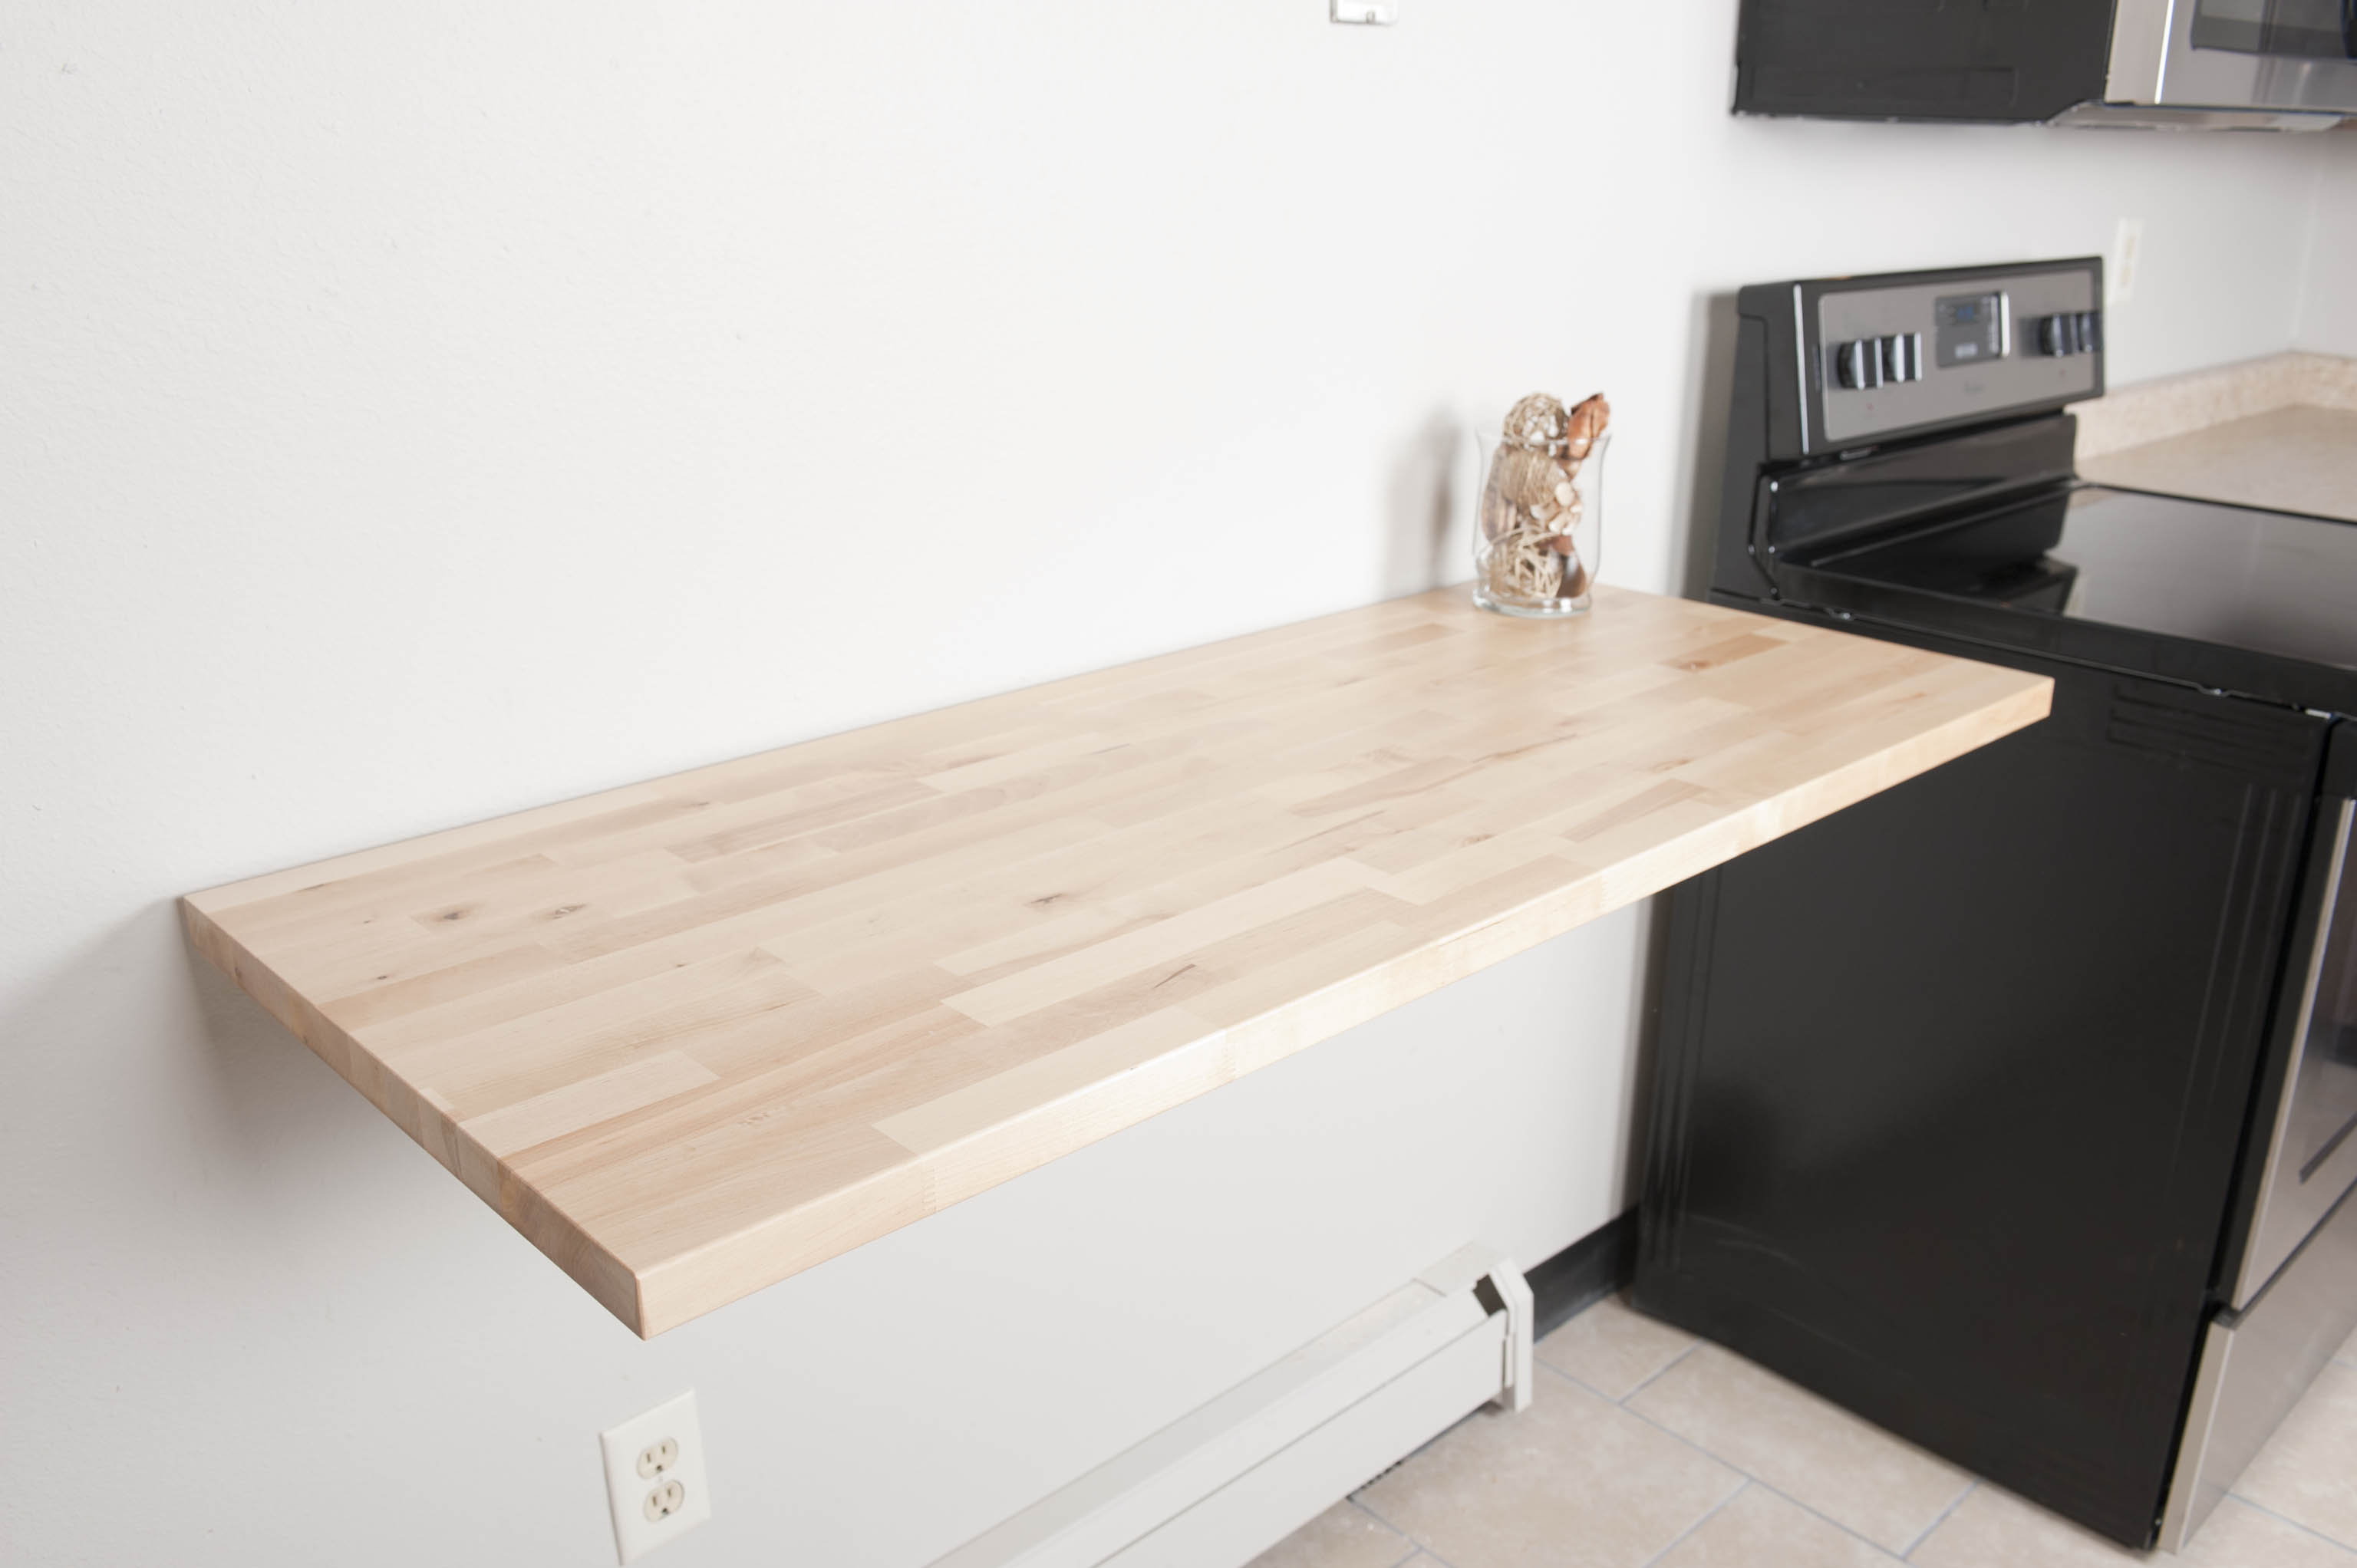 54×25 Butcher Block Dog Table With Casters